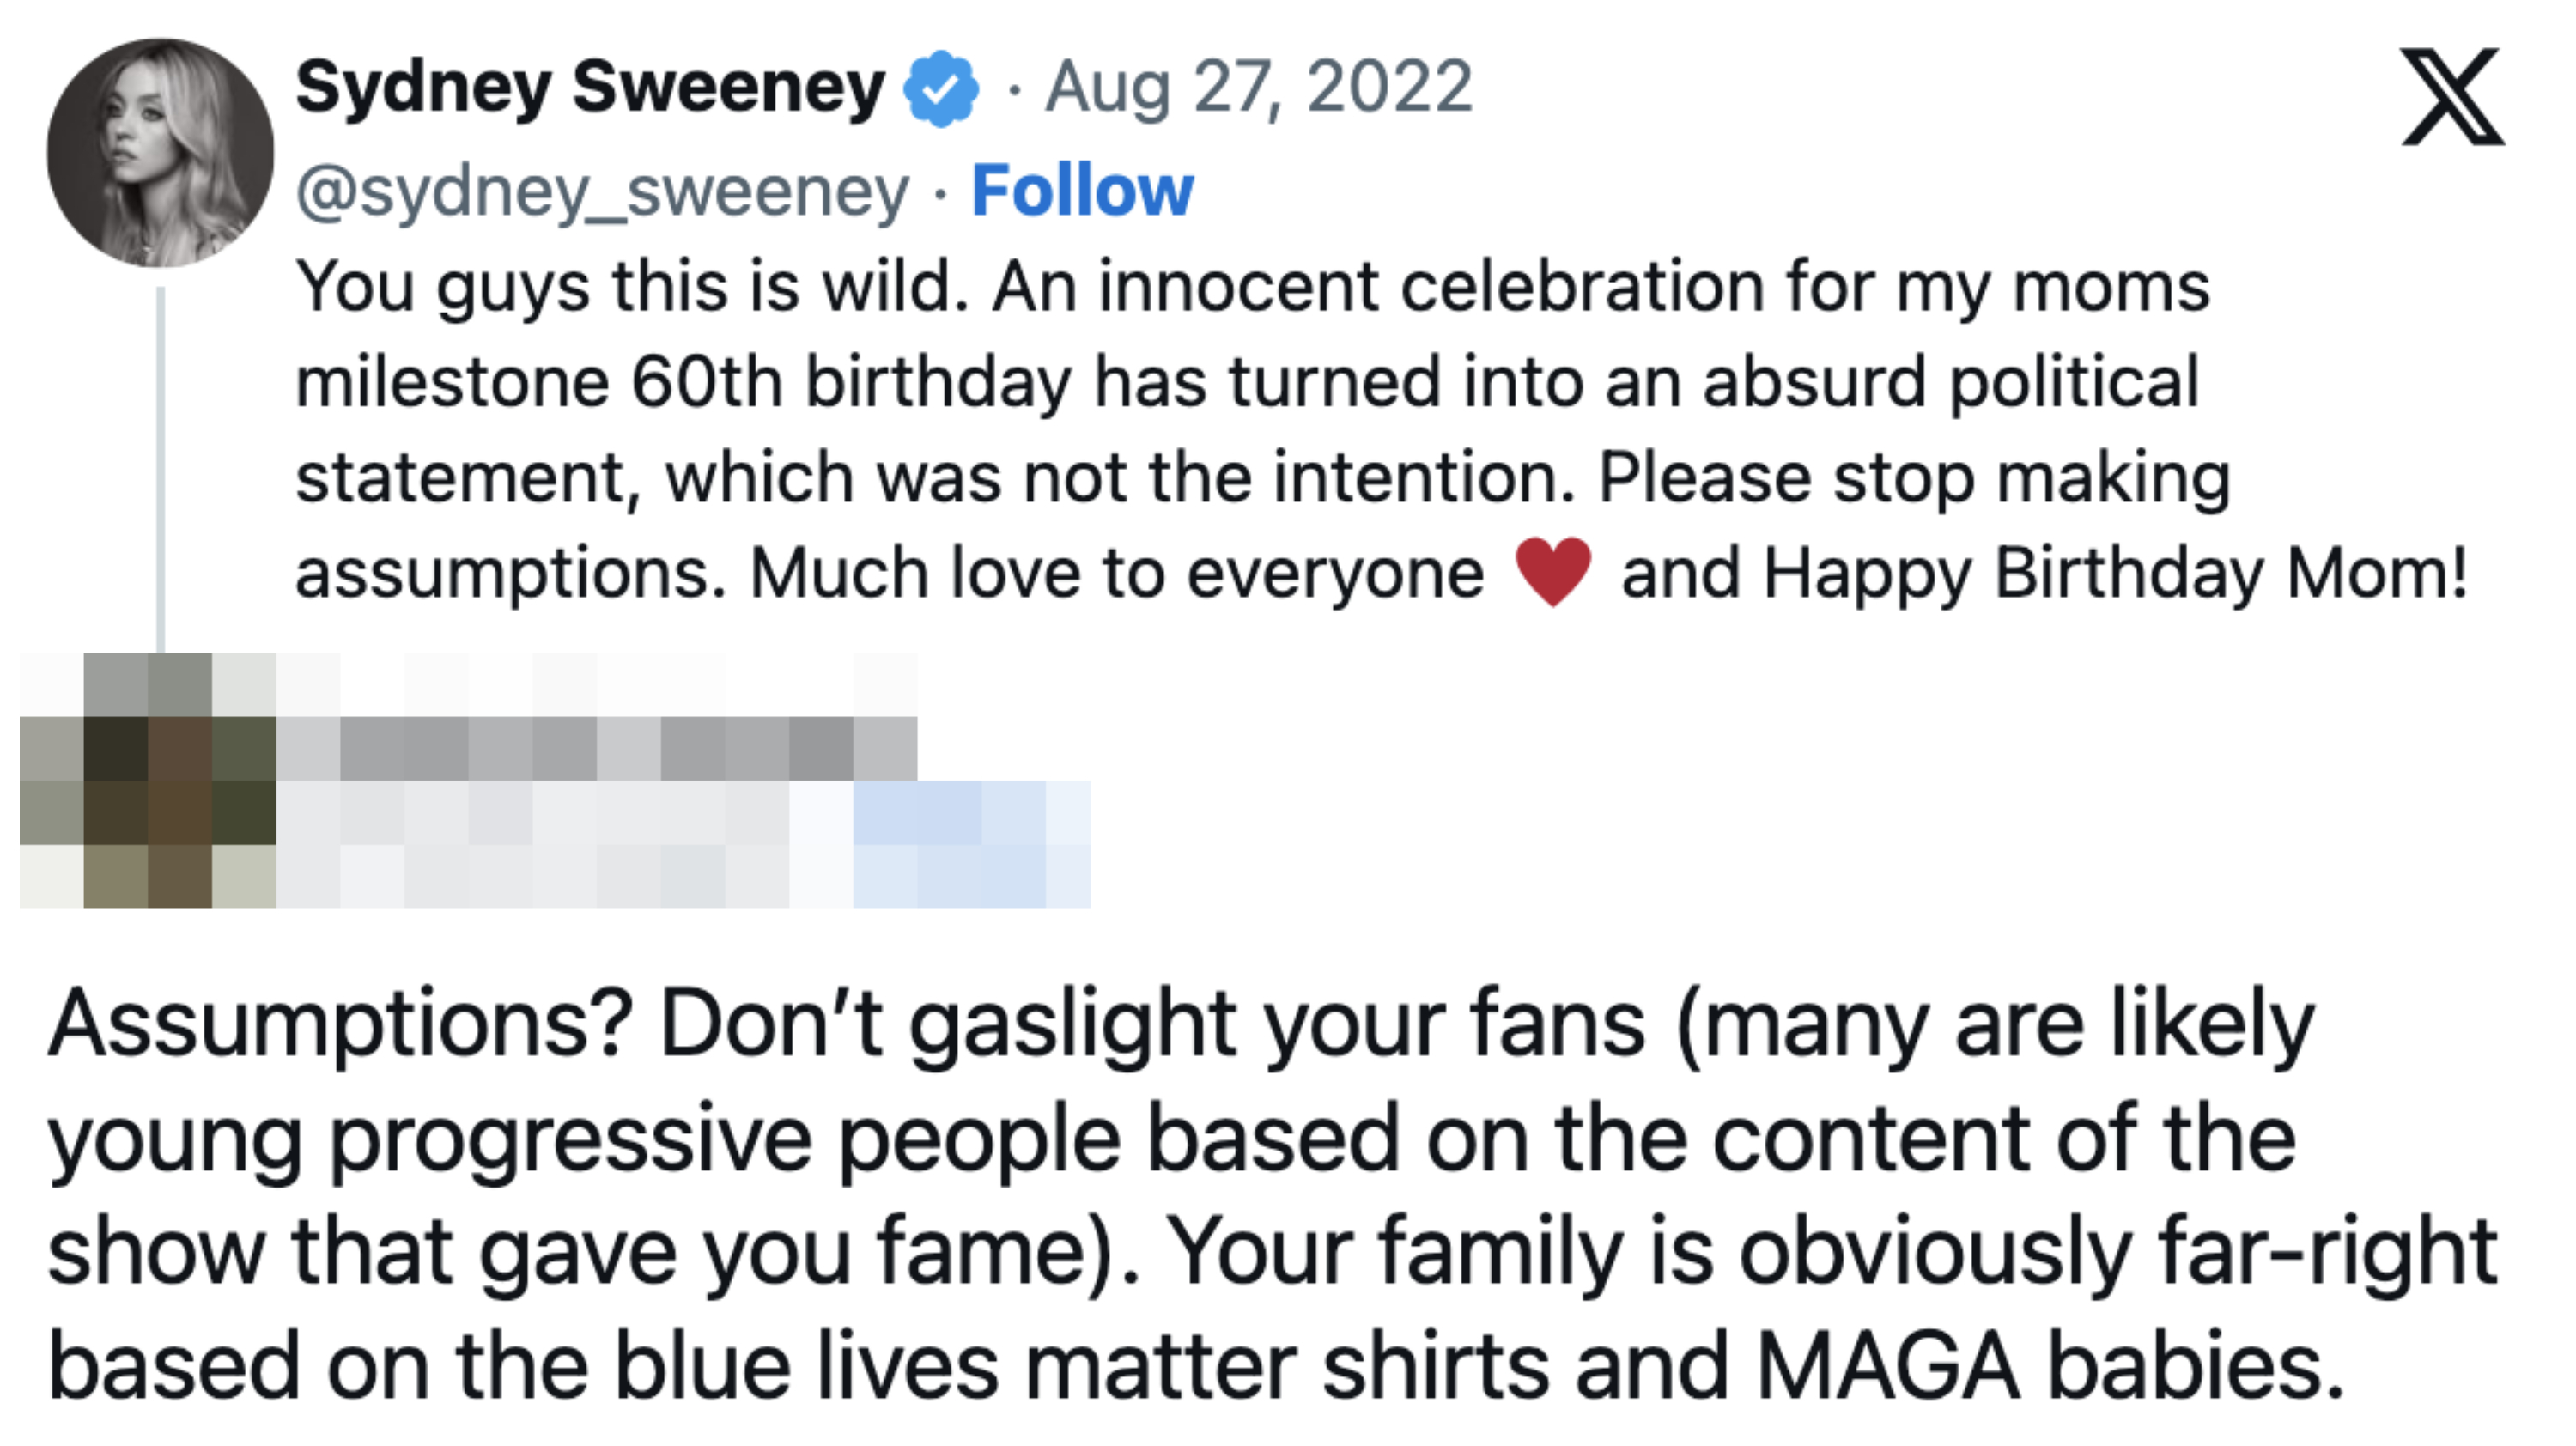 Screenshot of comment, including &quot;Don&#x27;t gaslight your fans ... your family is obviously far-right based on the blues lives matter shirts and MAGA babies&quot;